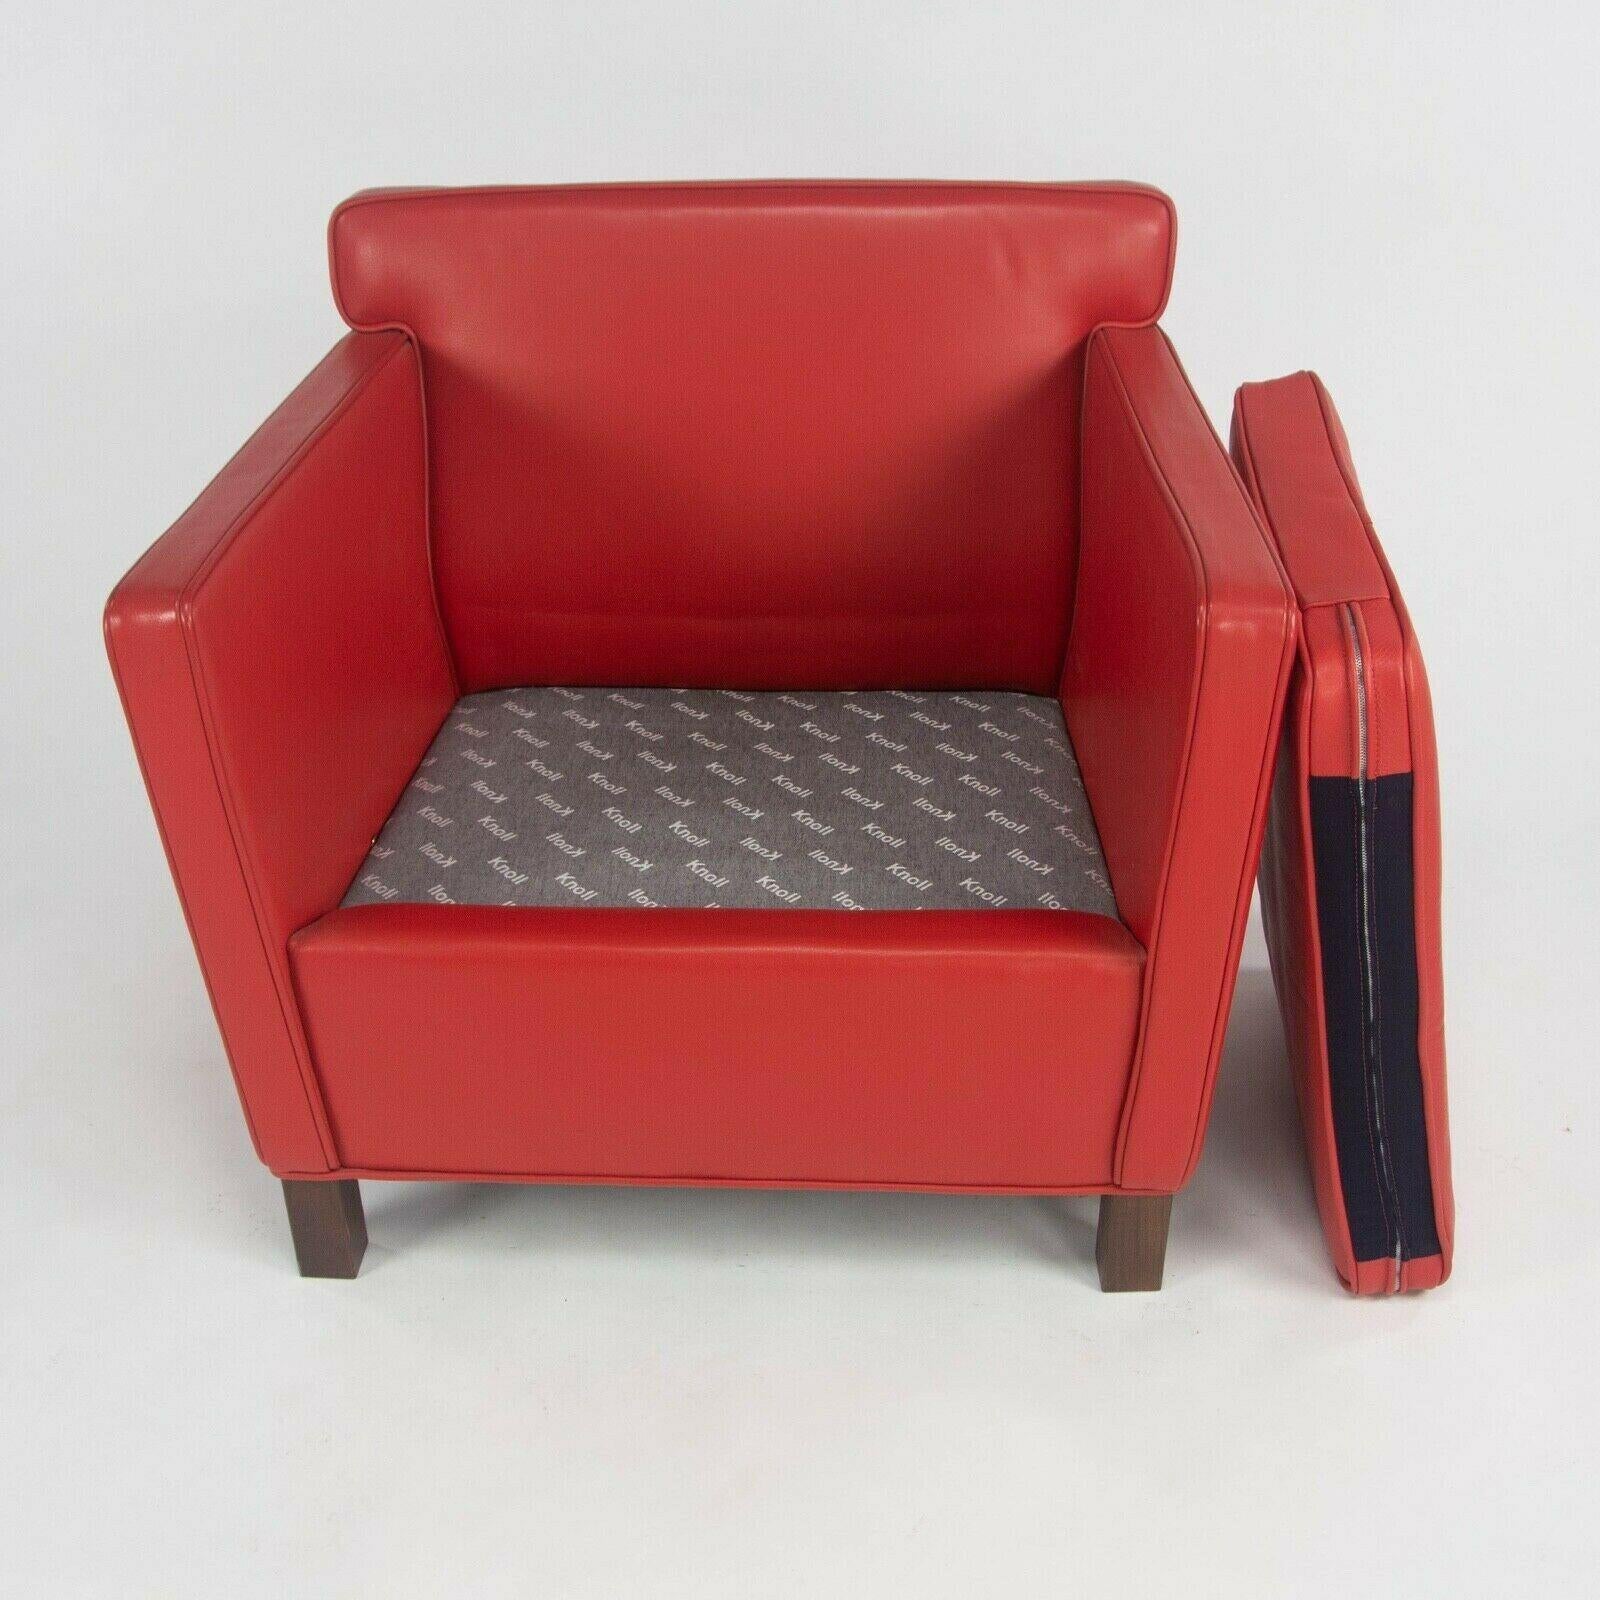 C. 2009 Pair of Mies Van Der Rohe Knoll Krefeld Lounge Chairs in Red Leather For Sale 6